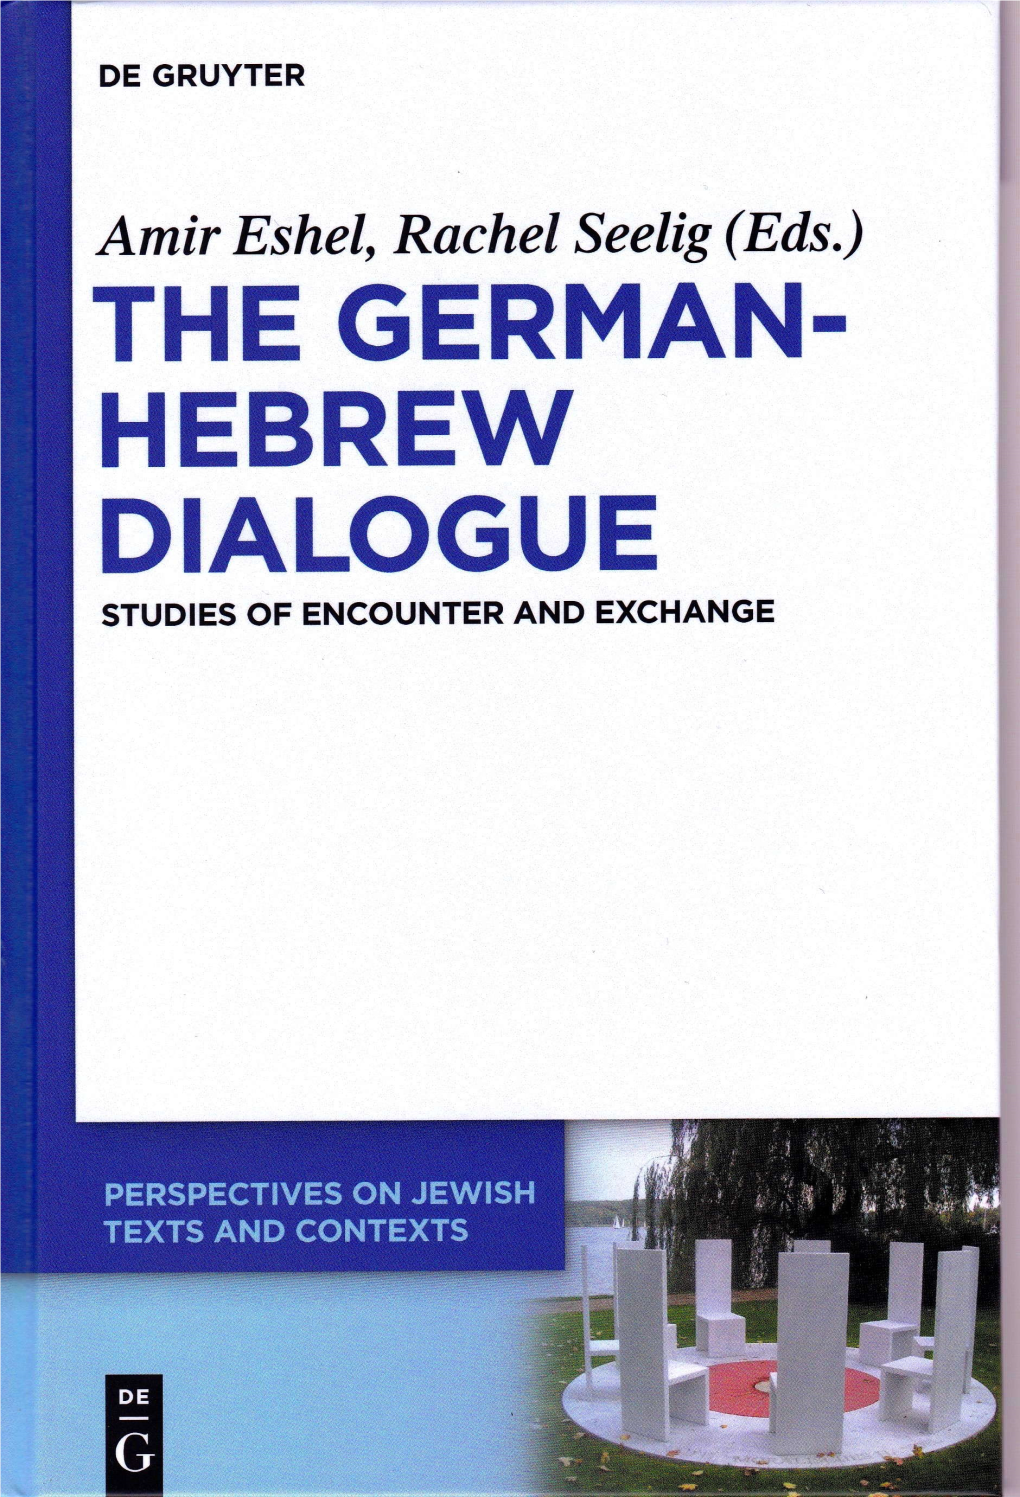 THE GERMAN. HEBREW DIALOGUE STUDIES of ENCOUNTER and EXCHANGE Mati Shemoelof the Bertin Prize for Hebrew Literature Translated by Rachel Seelig